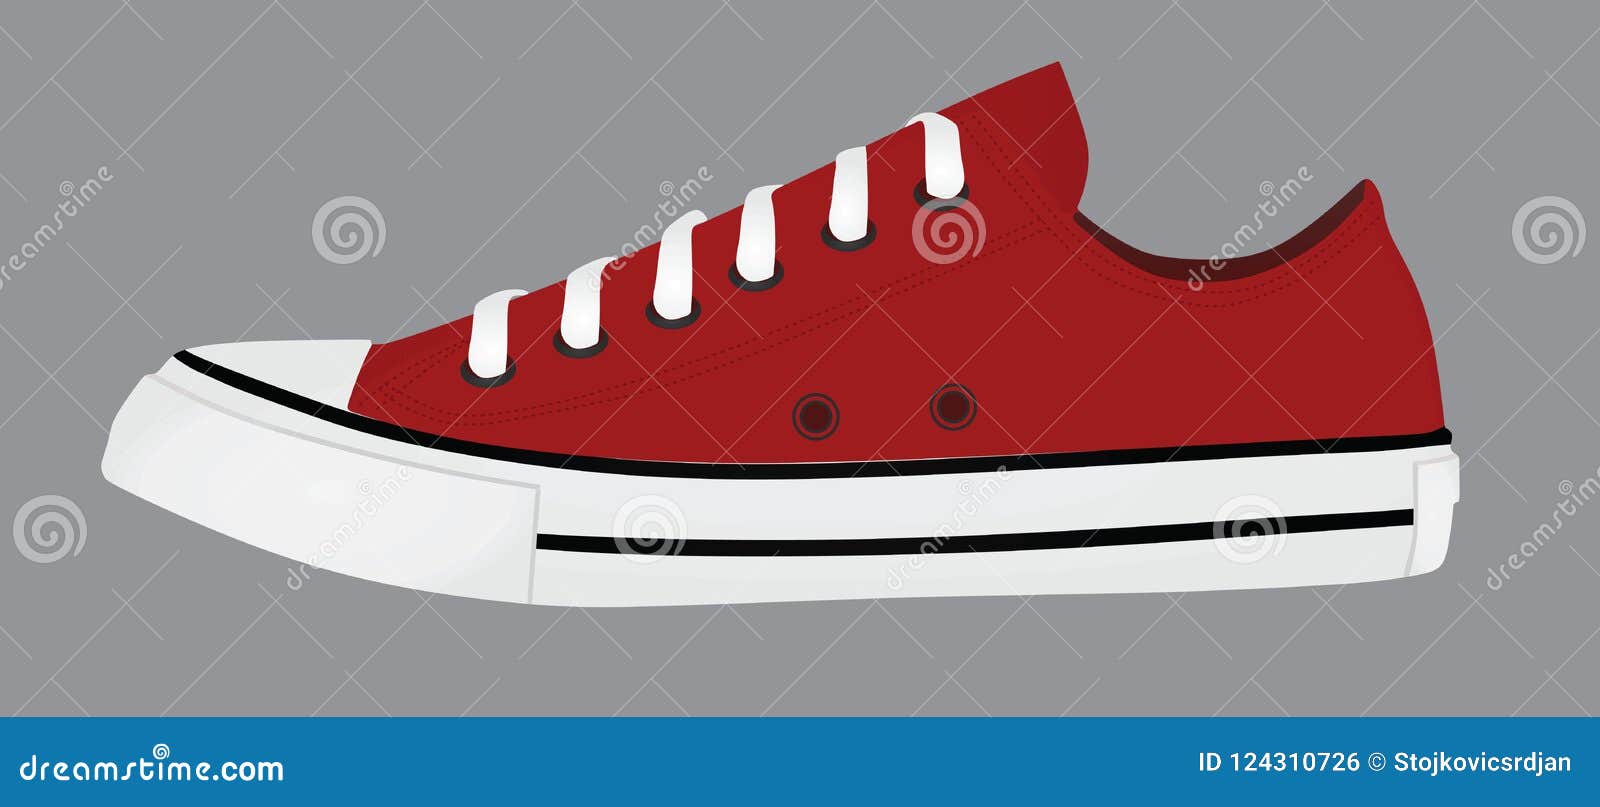 Red Sneaker View Stock Vector - Illustration of bright, concept: 124310726